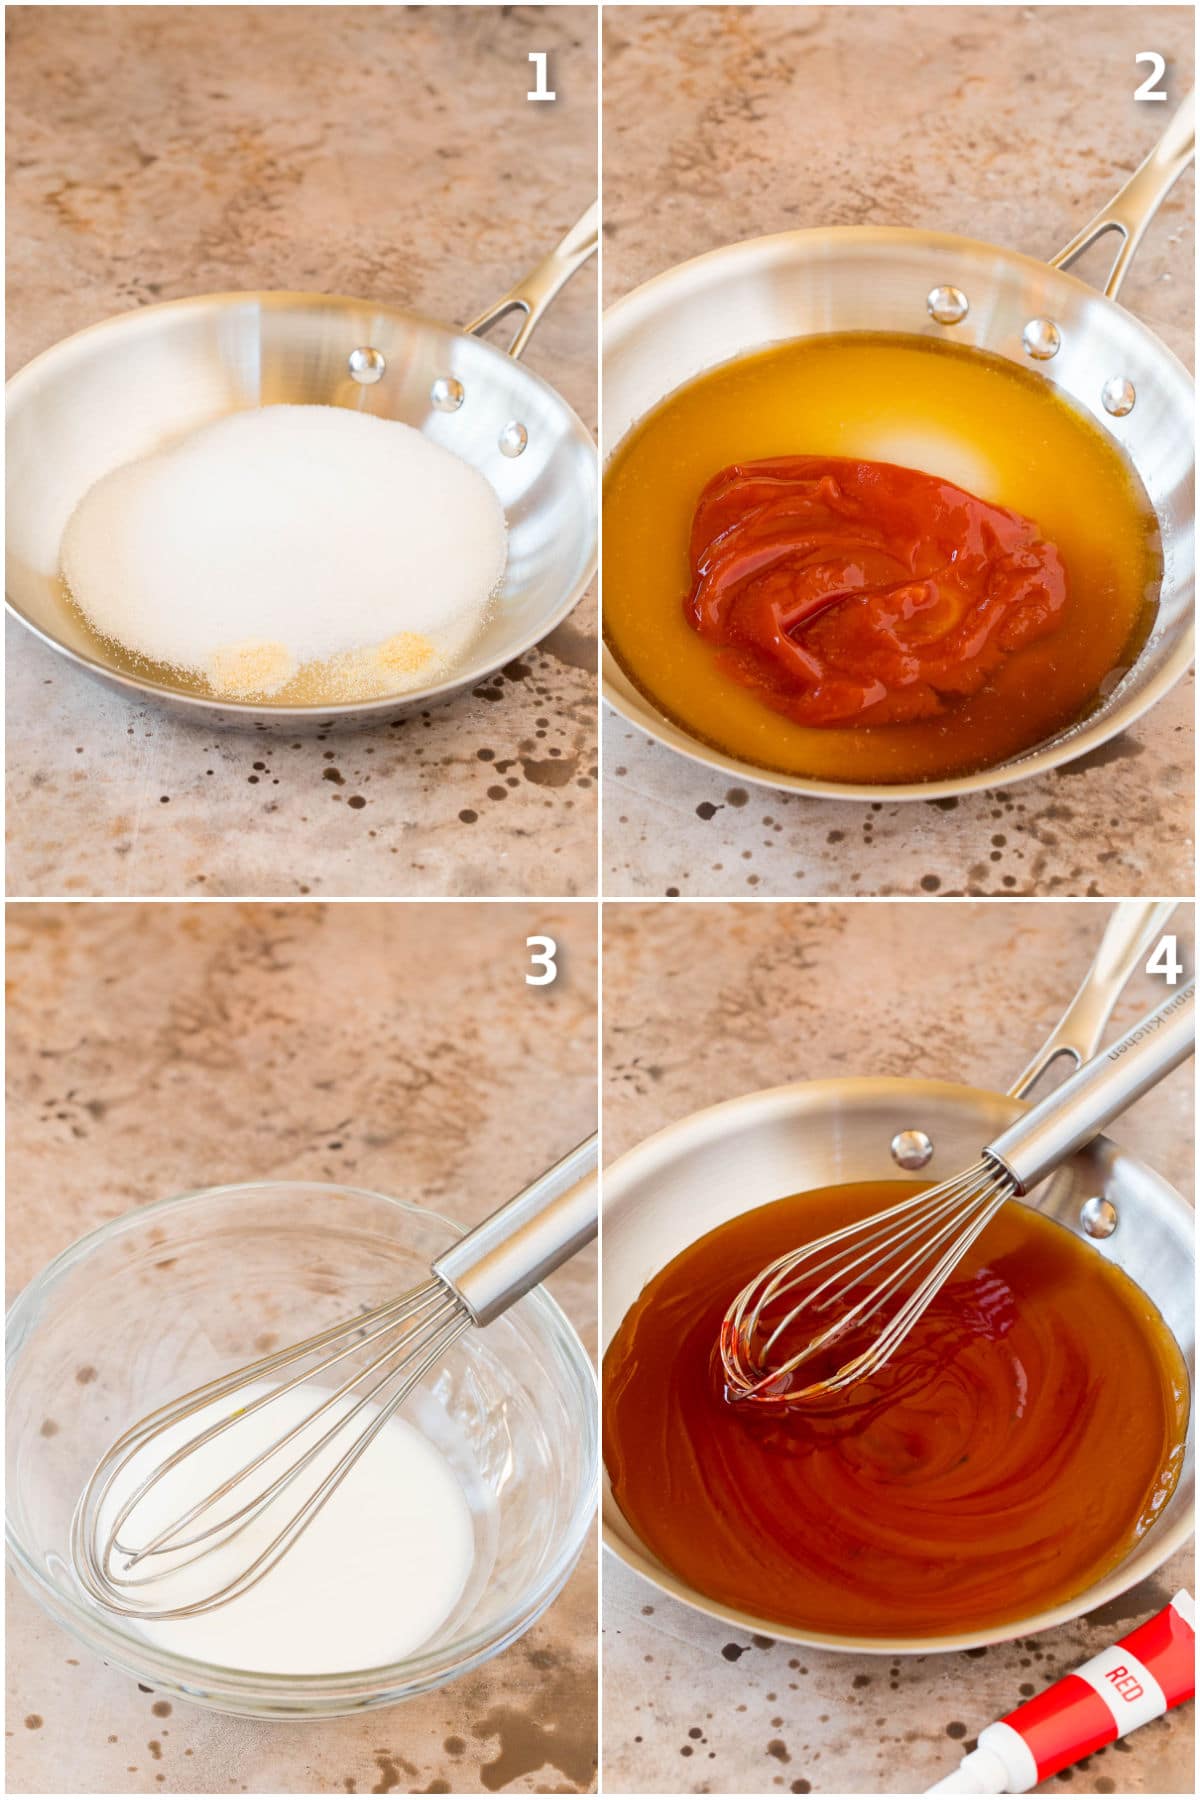 Step by step shots on how to make sweet and sour sauce.